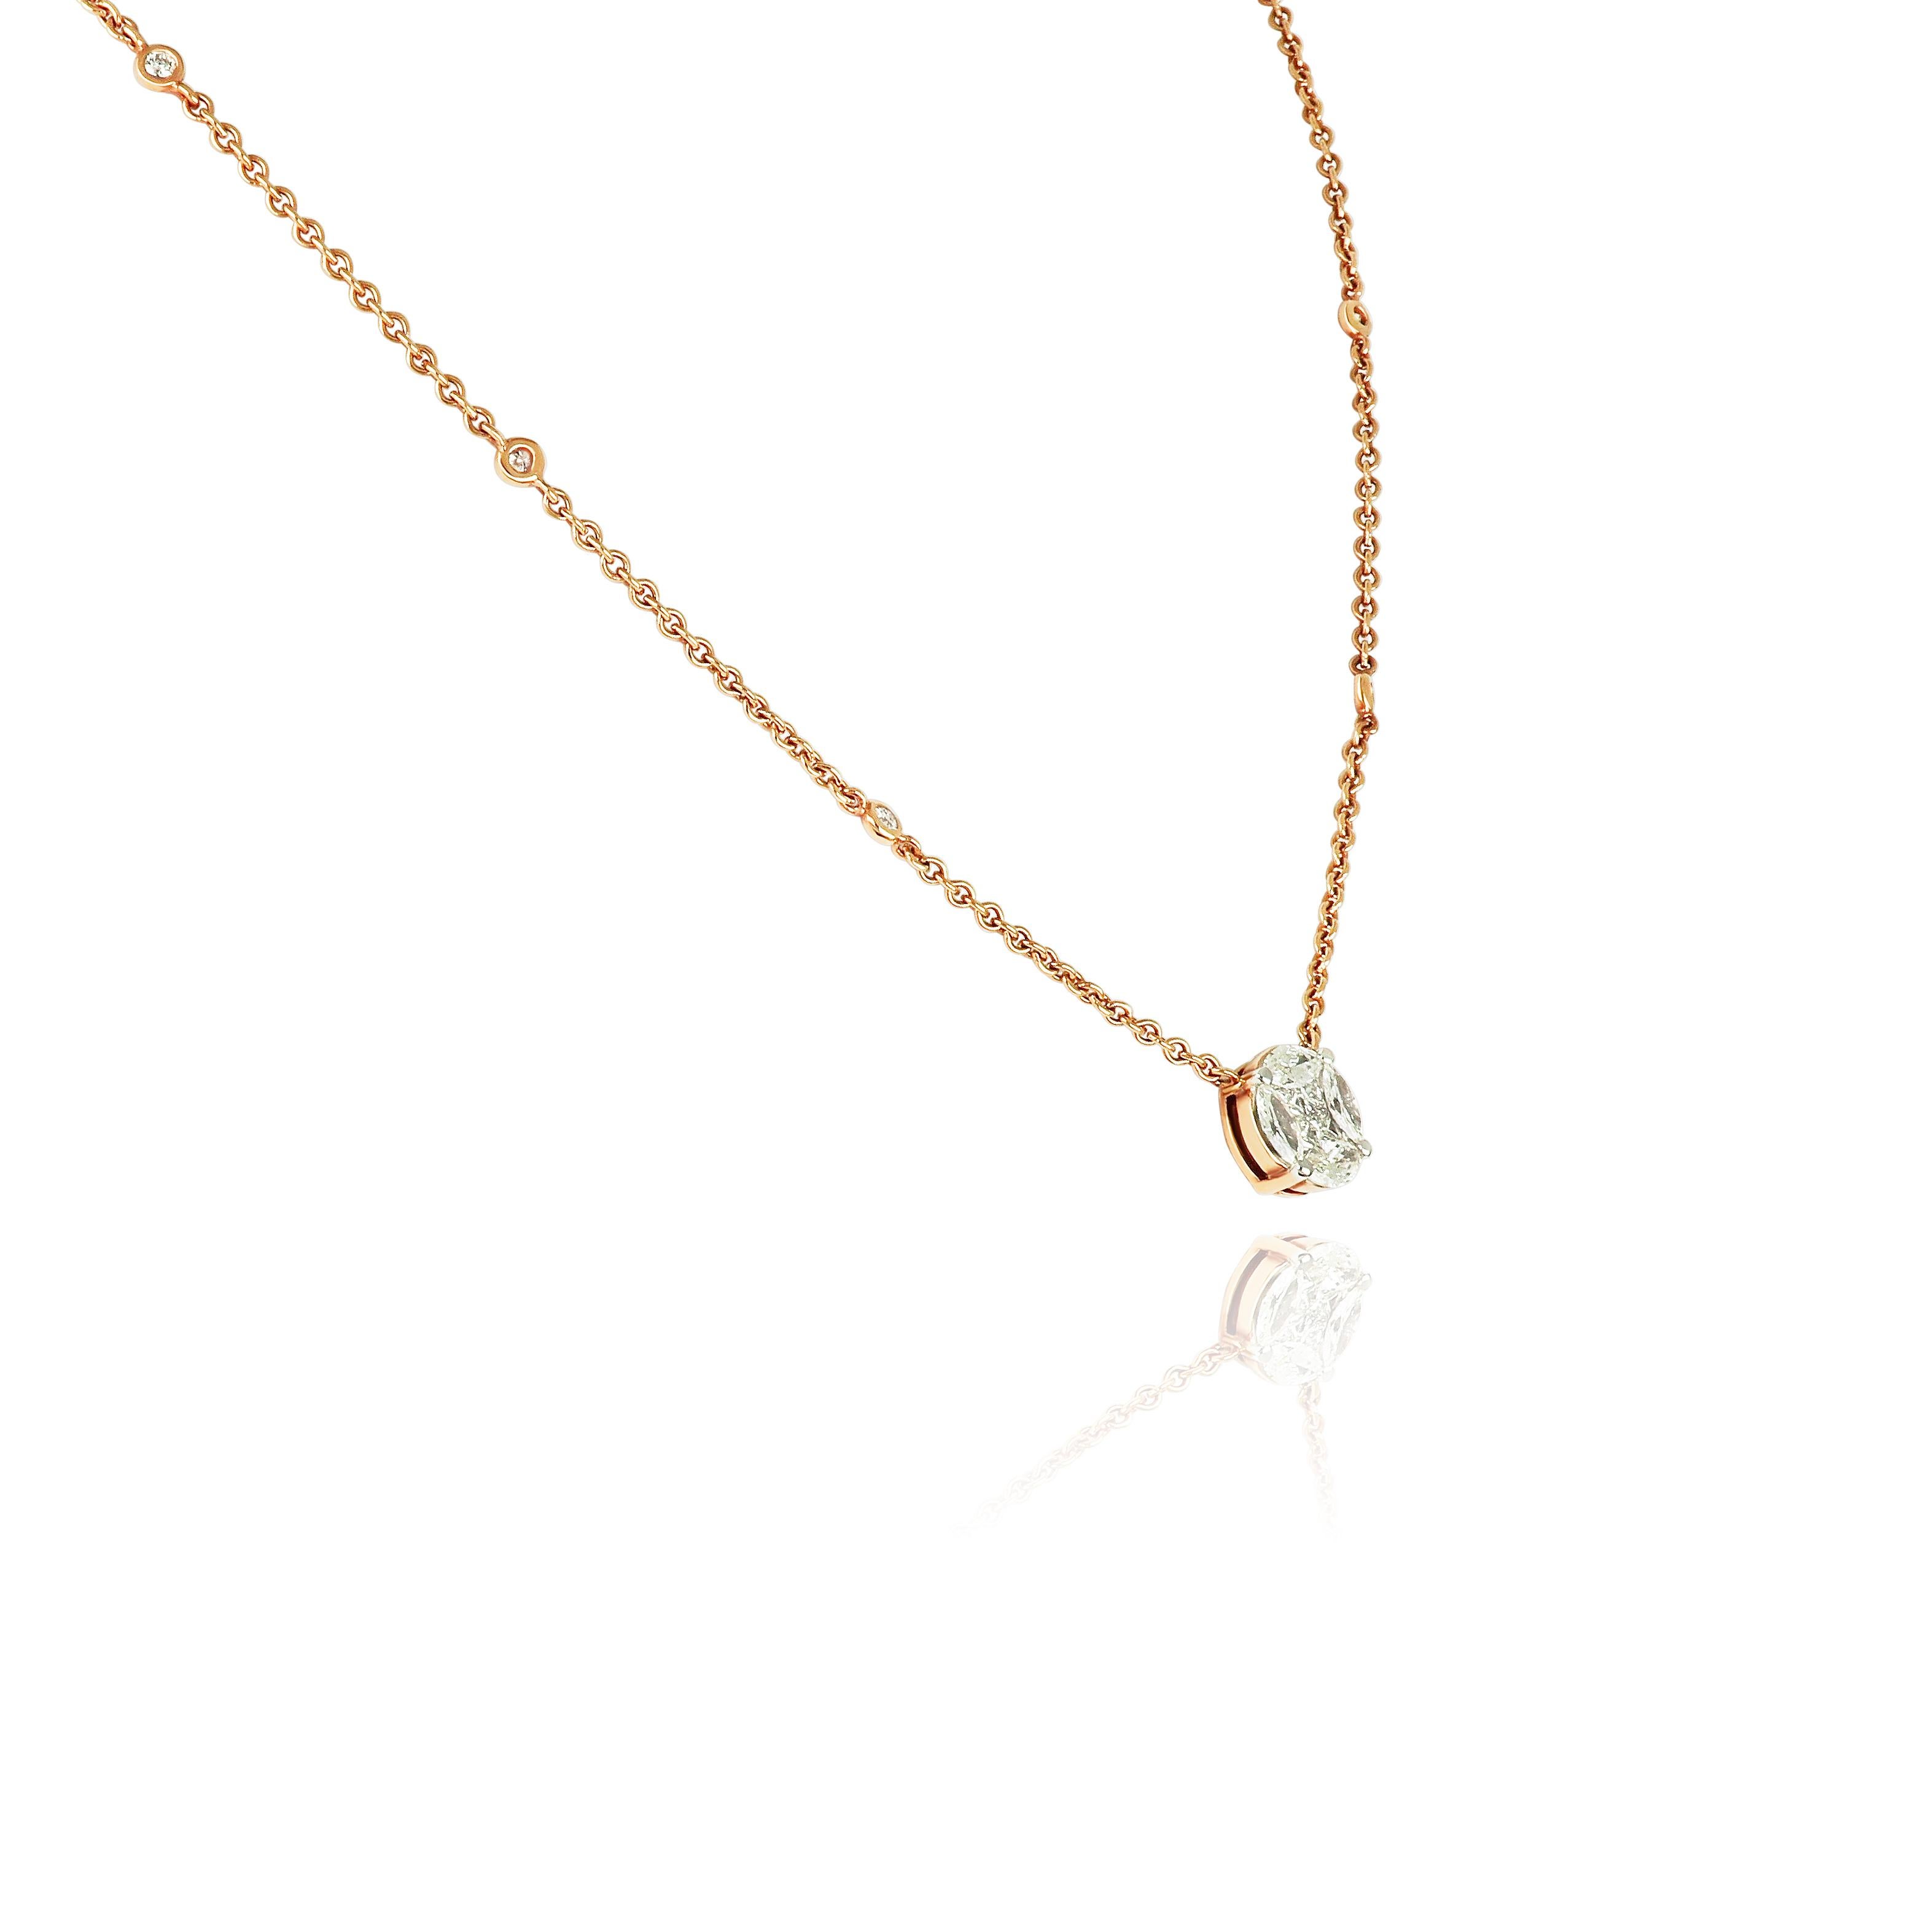 An ultimate day-to-night jewel, this 18 karat rose gold pendant showcases spectacular 4 marquise cut and 4 princess cut diamonds forming illusion of round shaped diamond. Where each diamond is exactly matched and set with the highest precision,